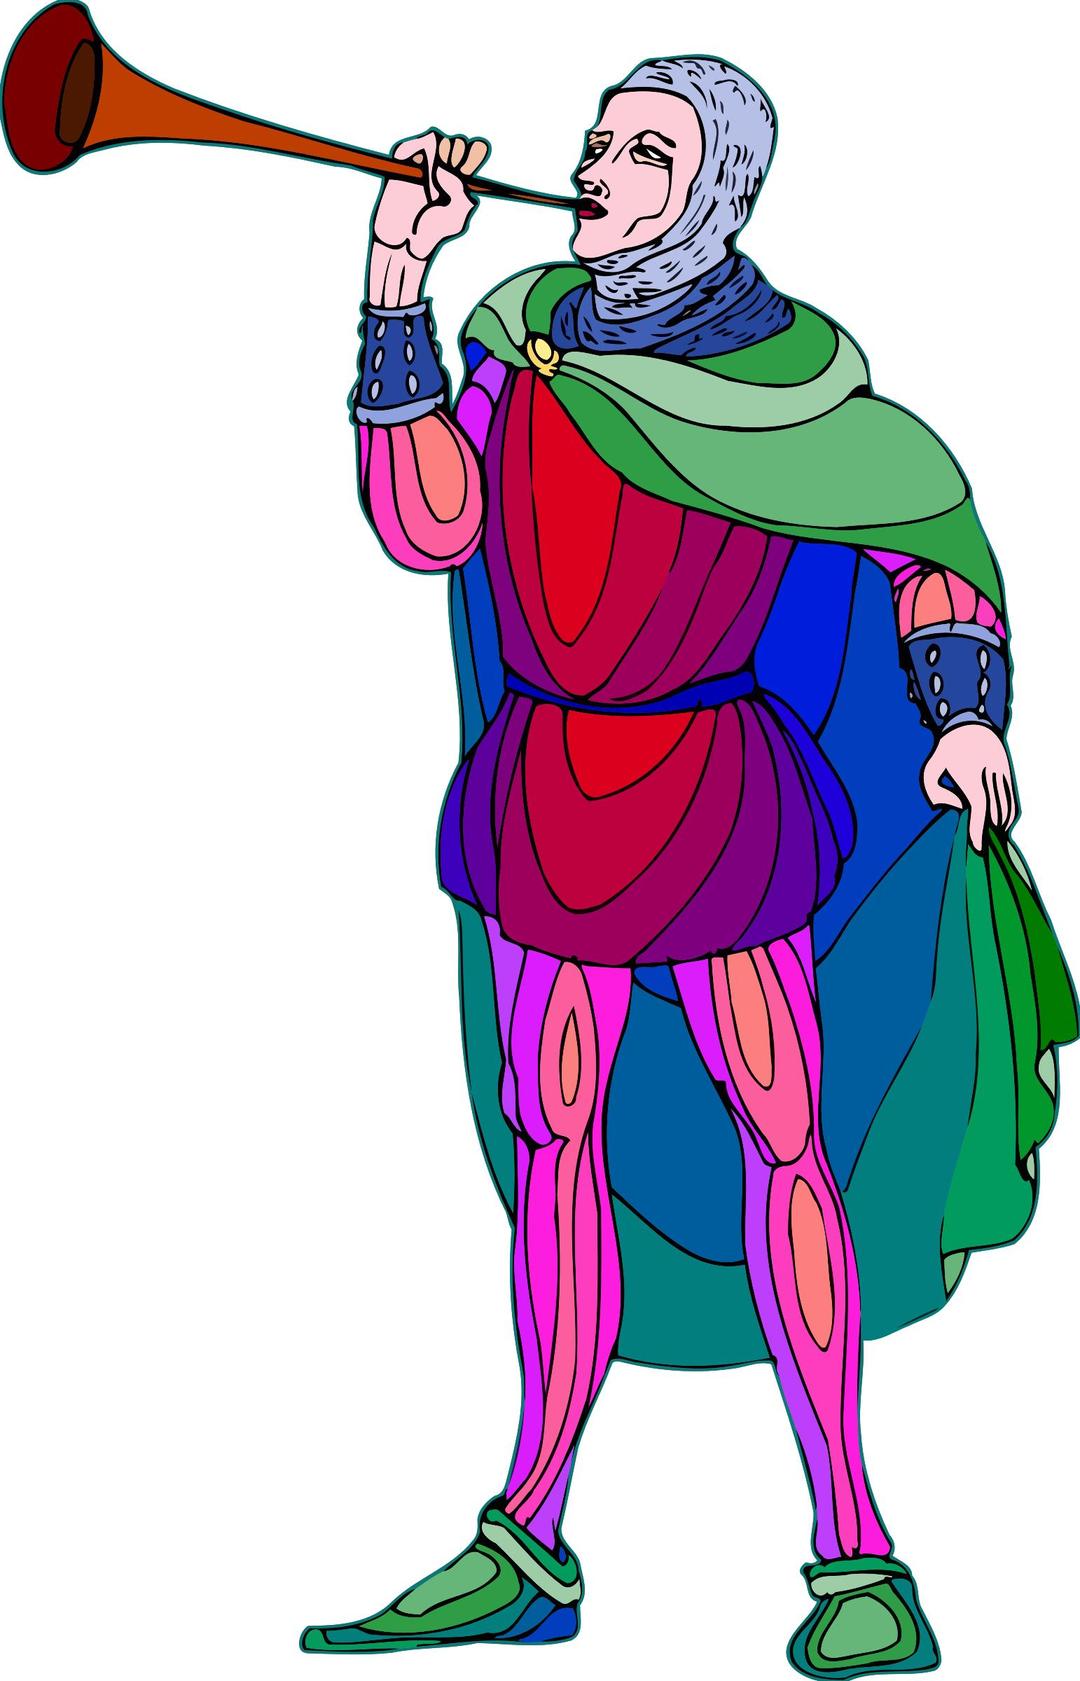 Shakespeare characters - herald (colour) png transparent